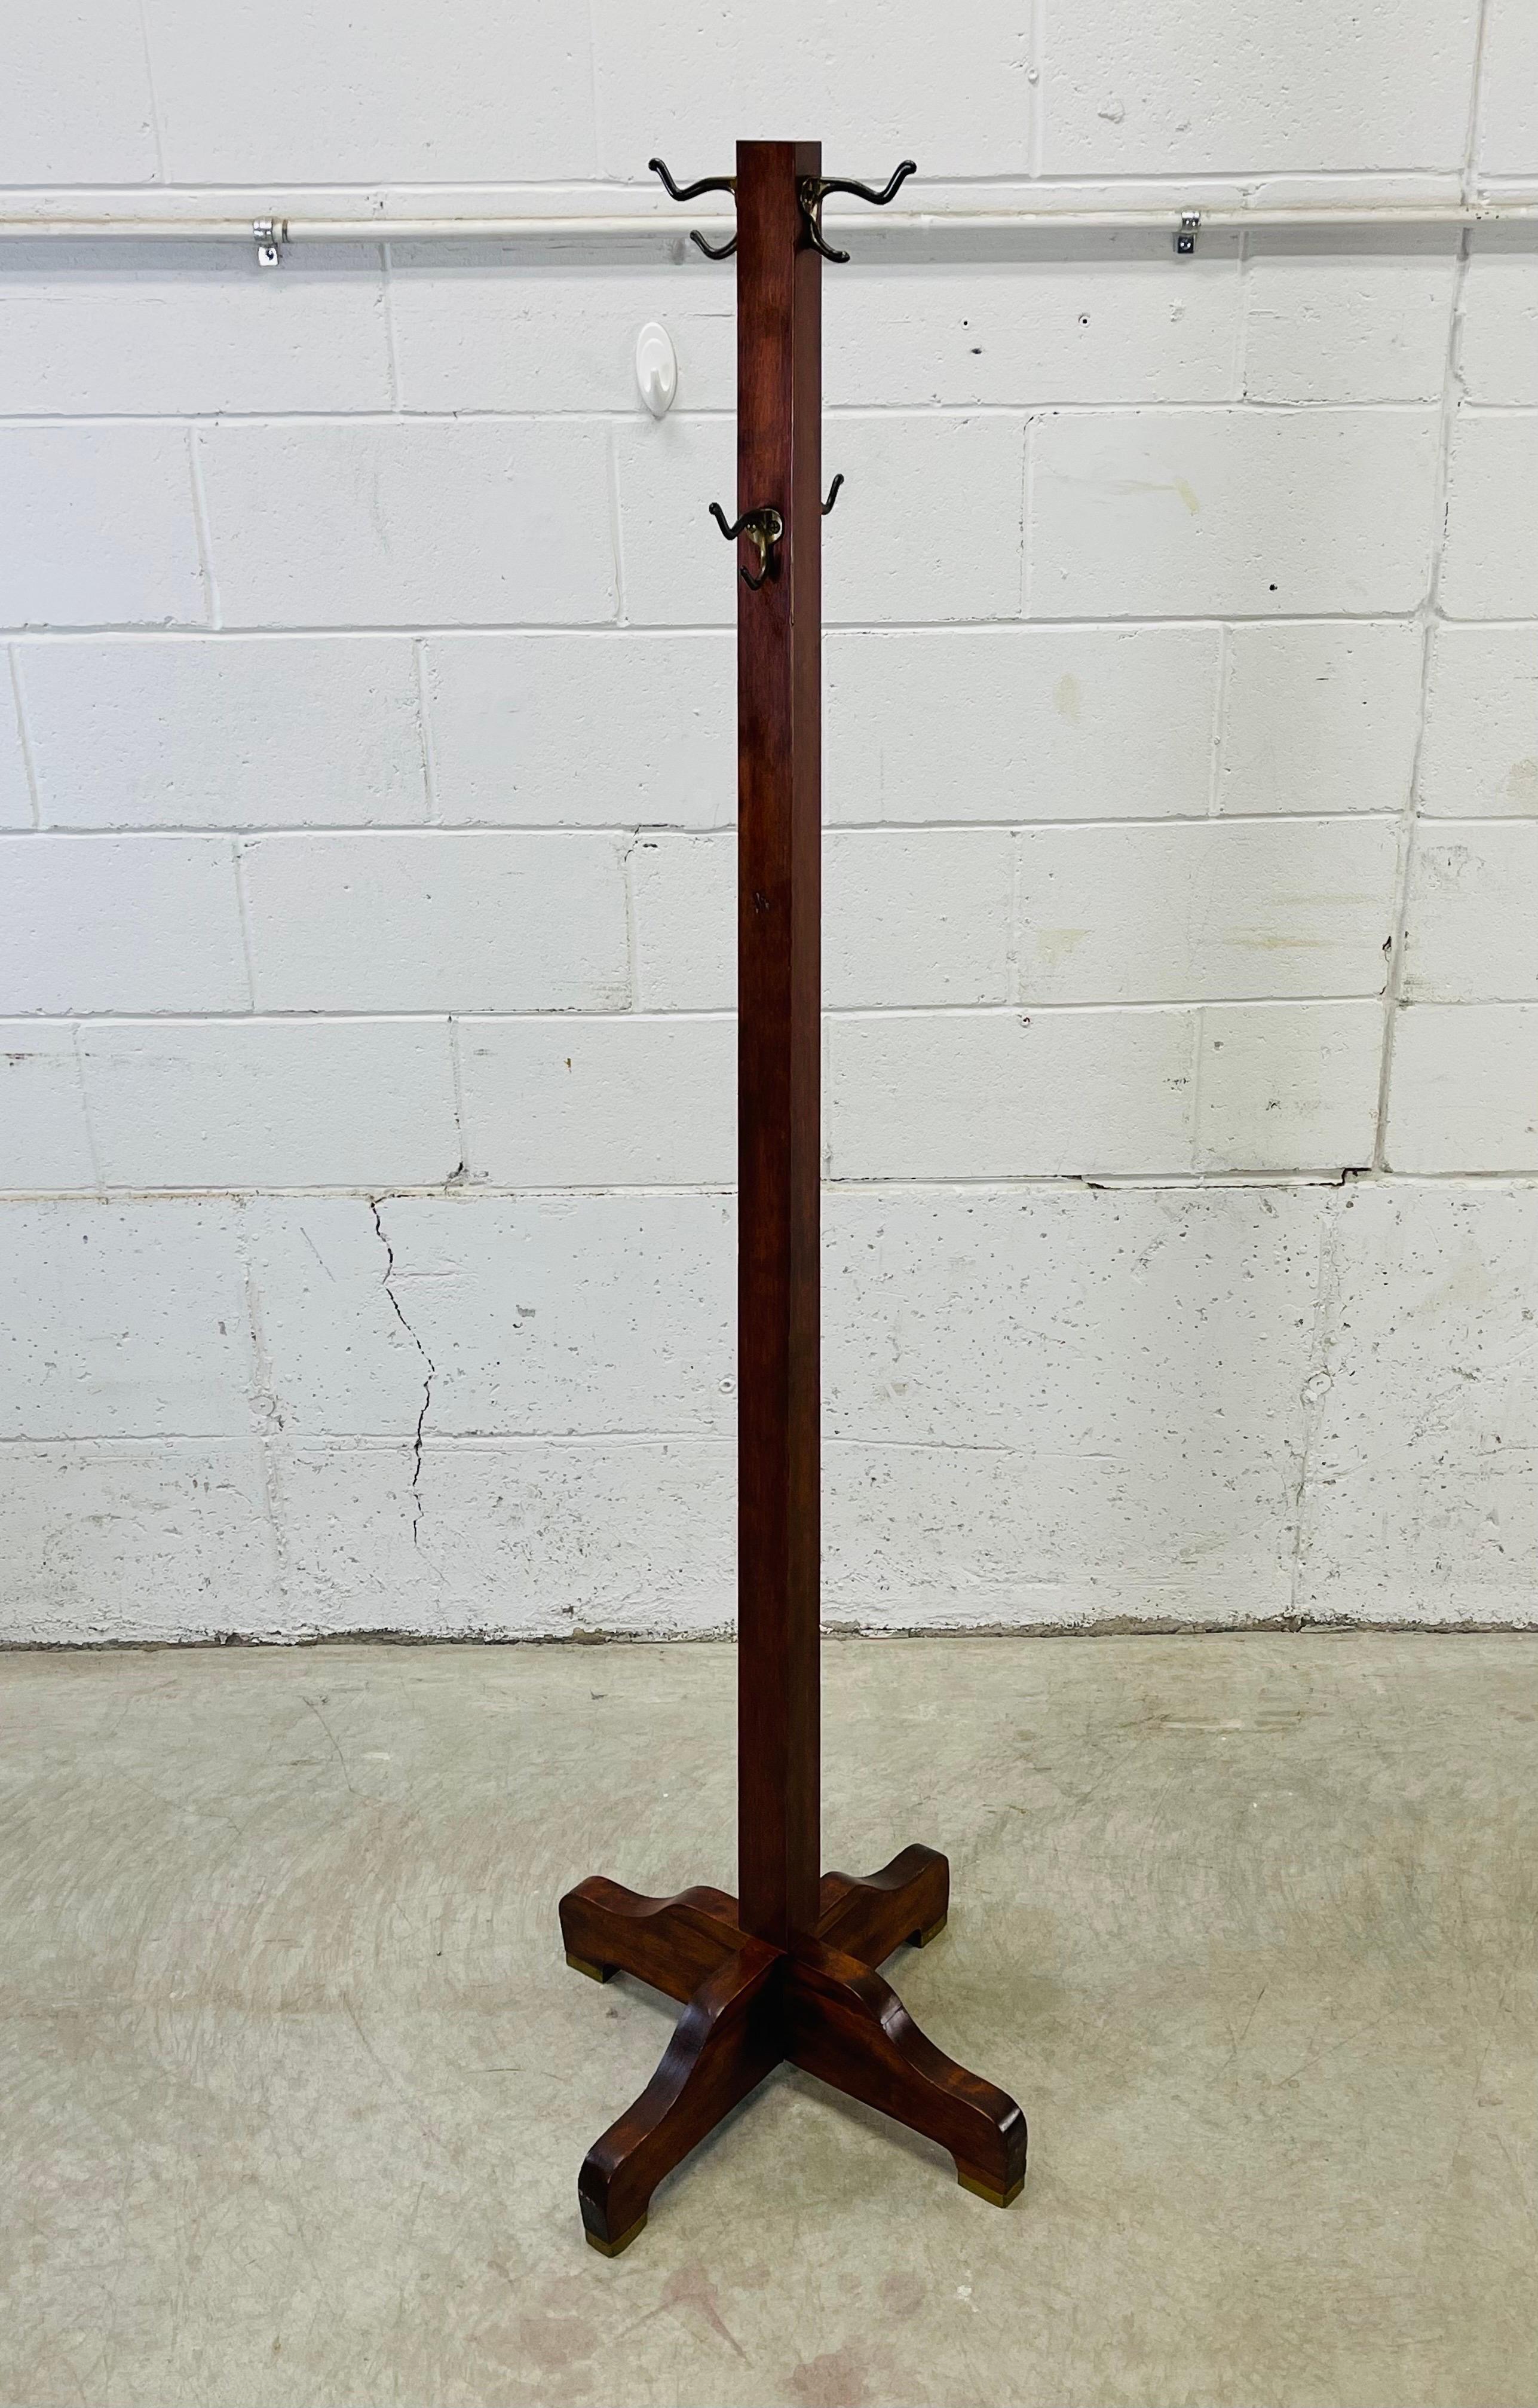 Vintage 1930s Mission Oak style coat rack with brass accented feet. The coat rack has four hooks and is sturdy. Marked underneath Sikes Furniture.